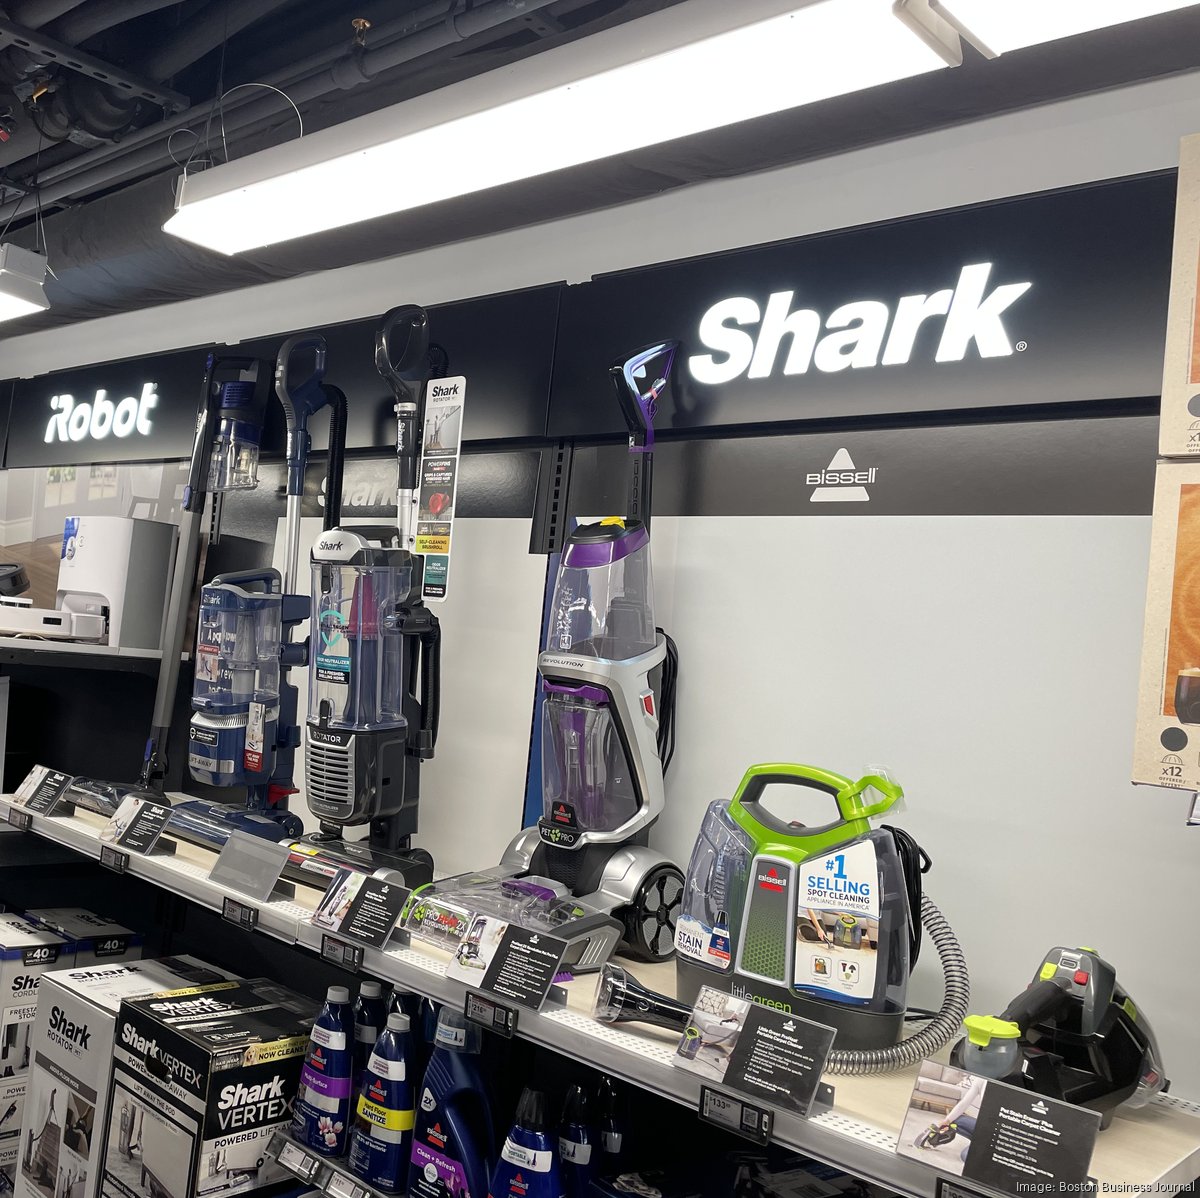 Shark Beauty expands its hair care collection - Appliance Retailer